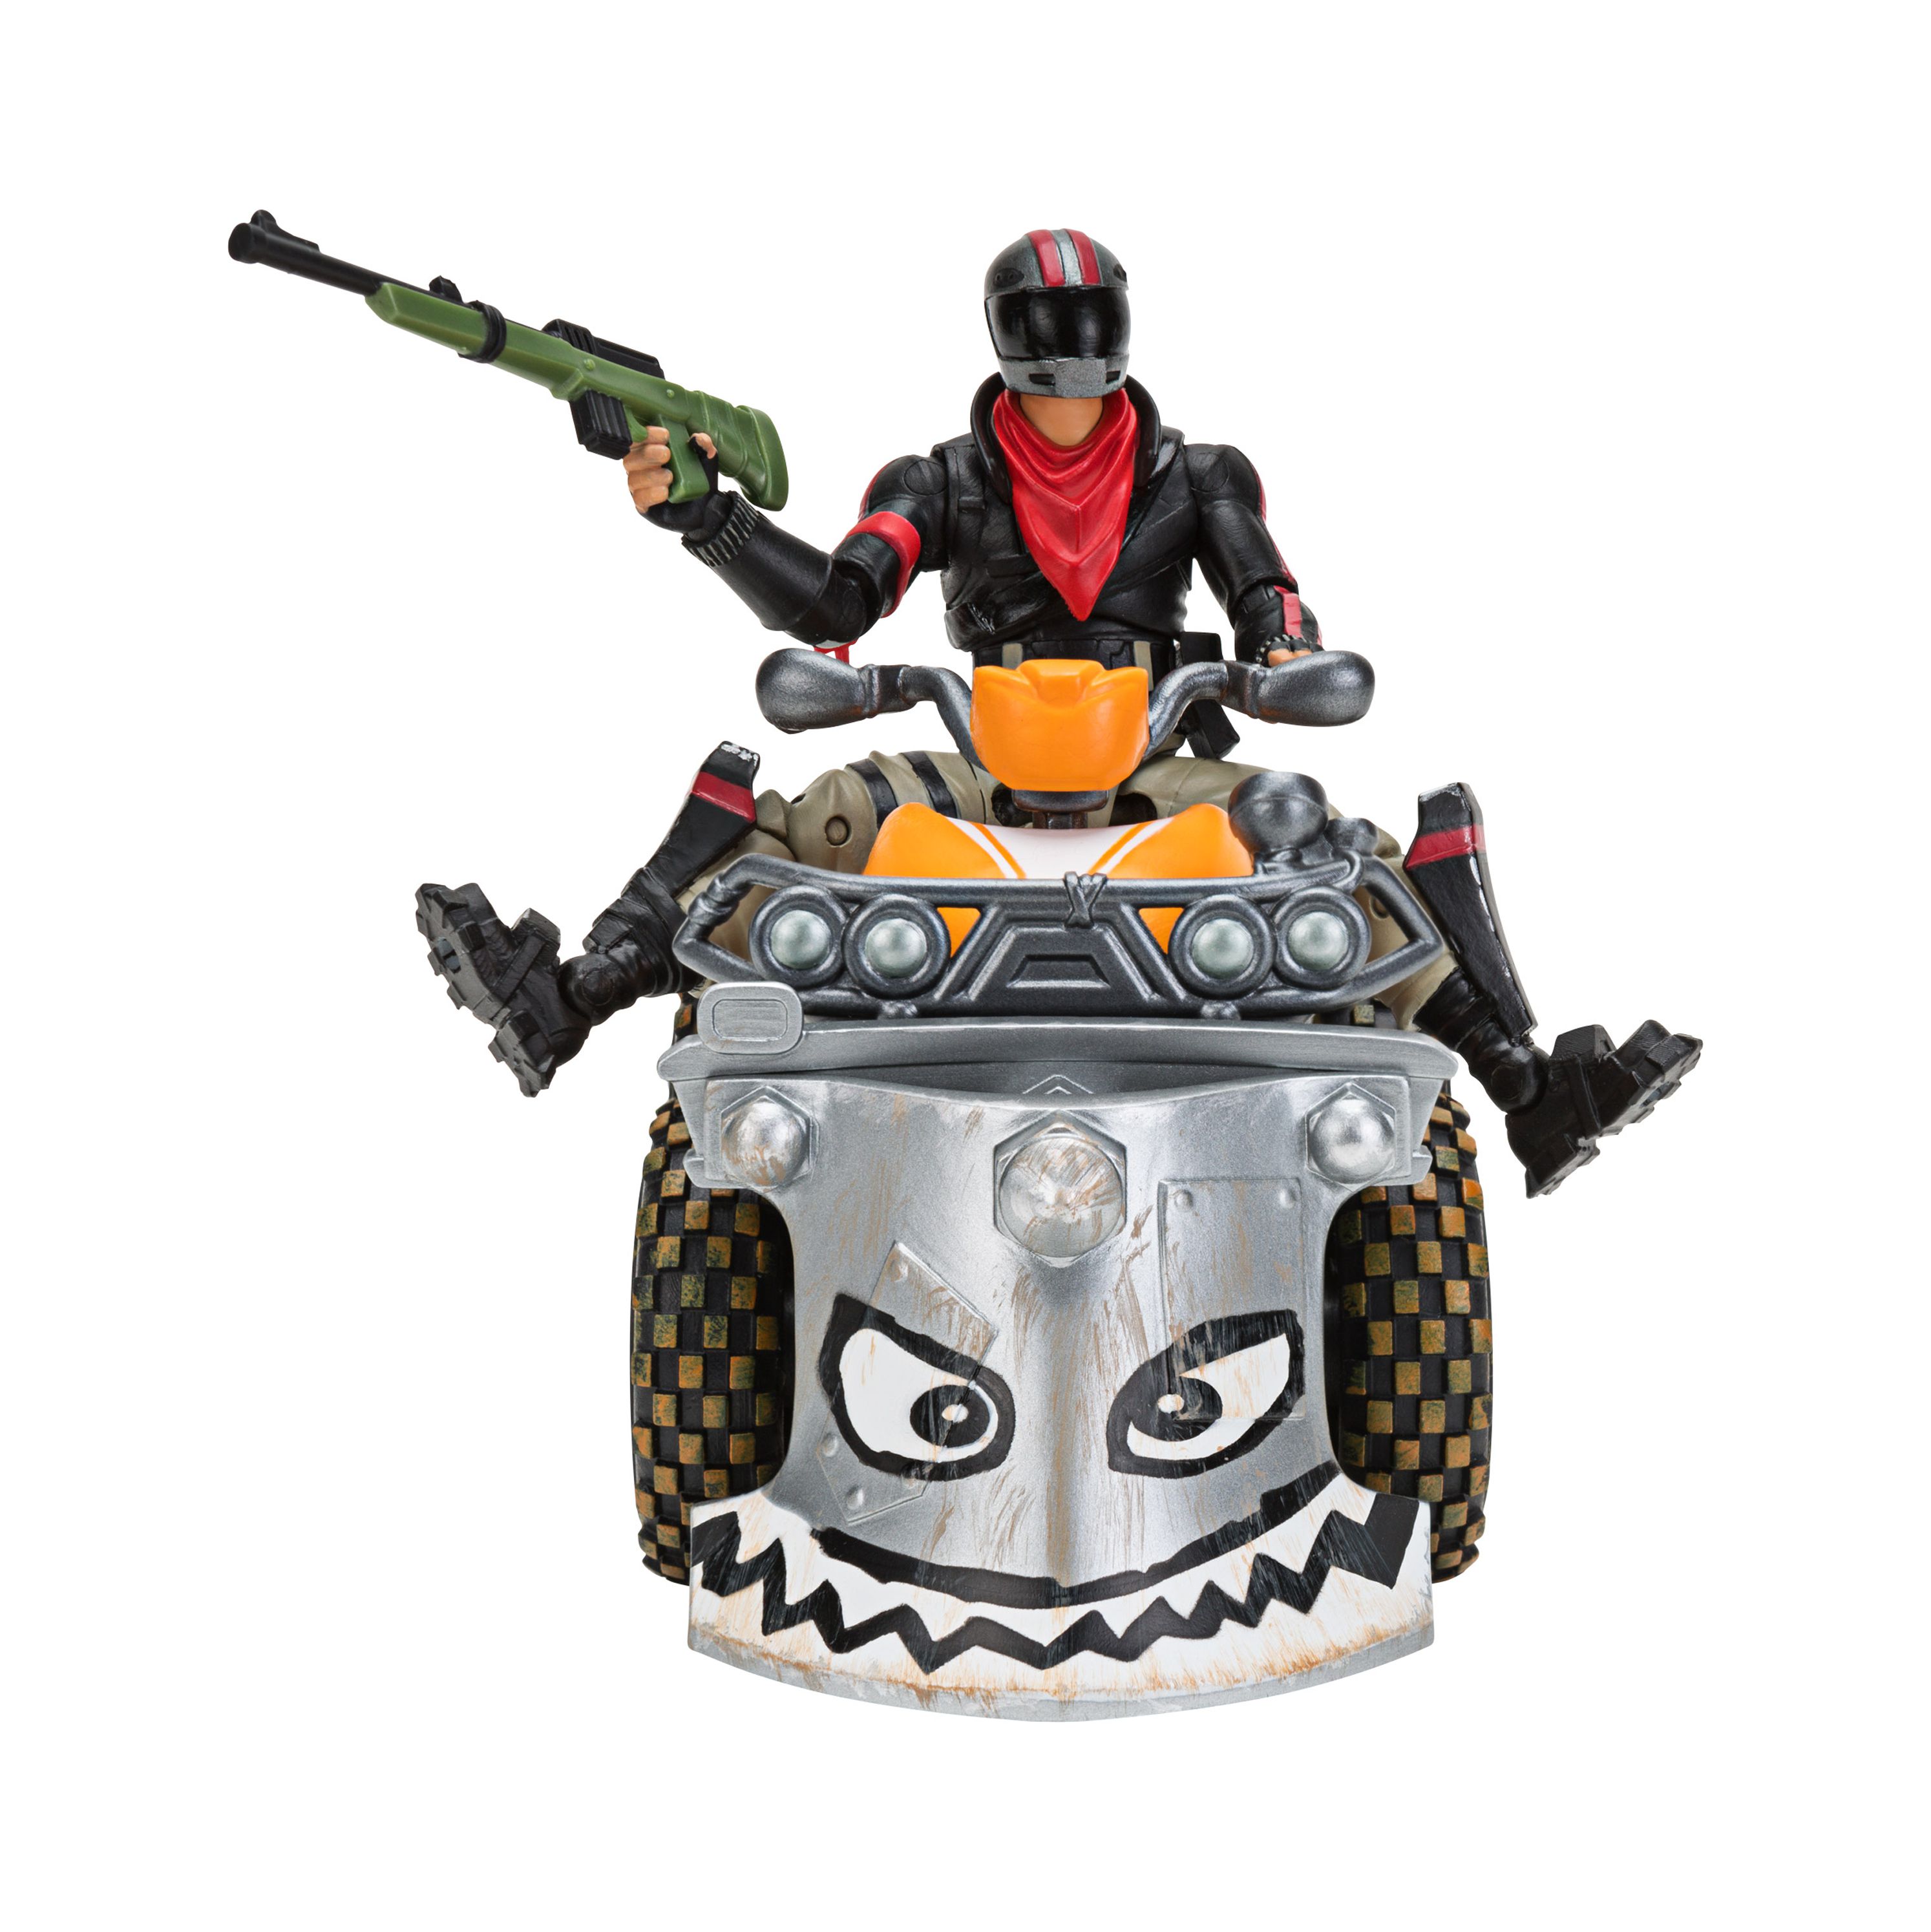 Fortnite Quadcrasher Vehicle with Burnout 4-inch Action Figure Included - image 1 of 13